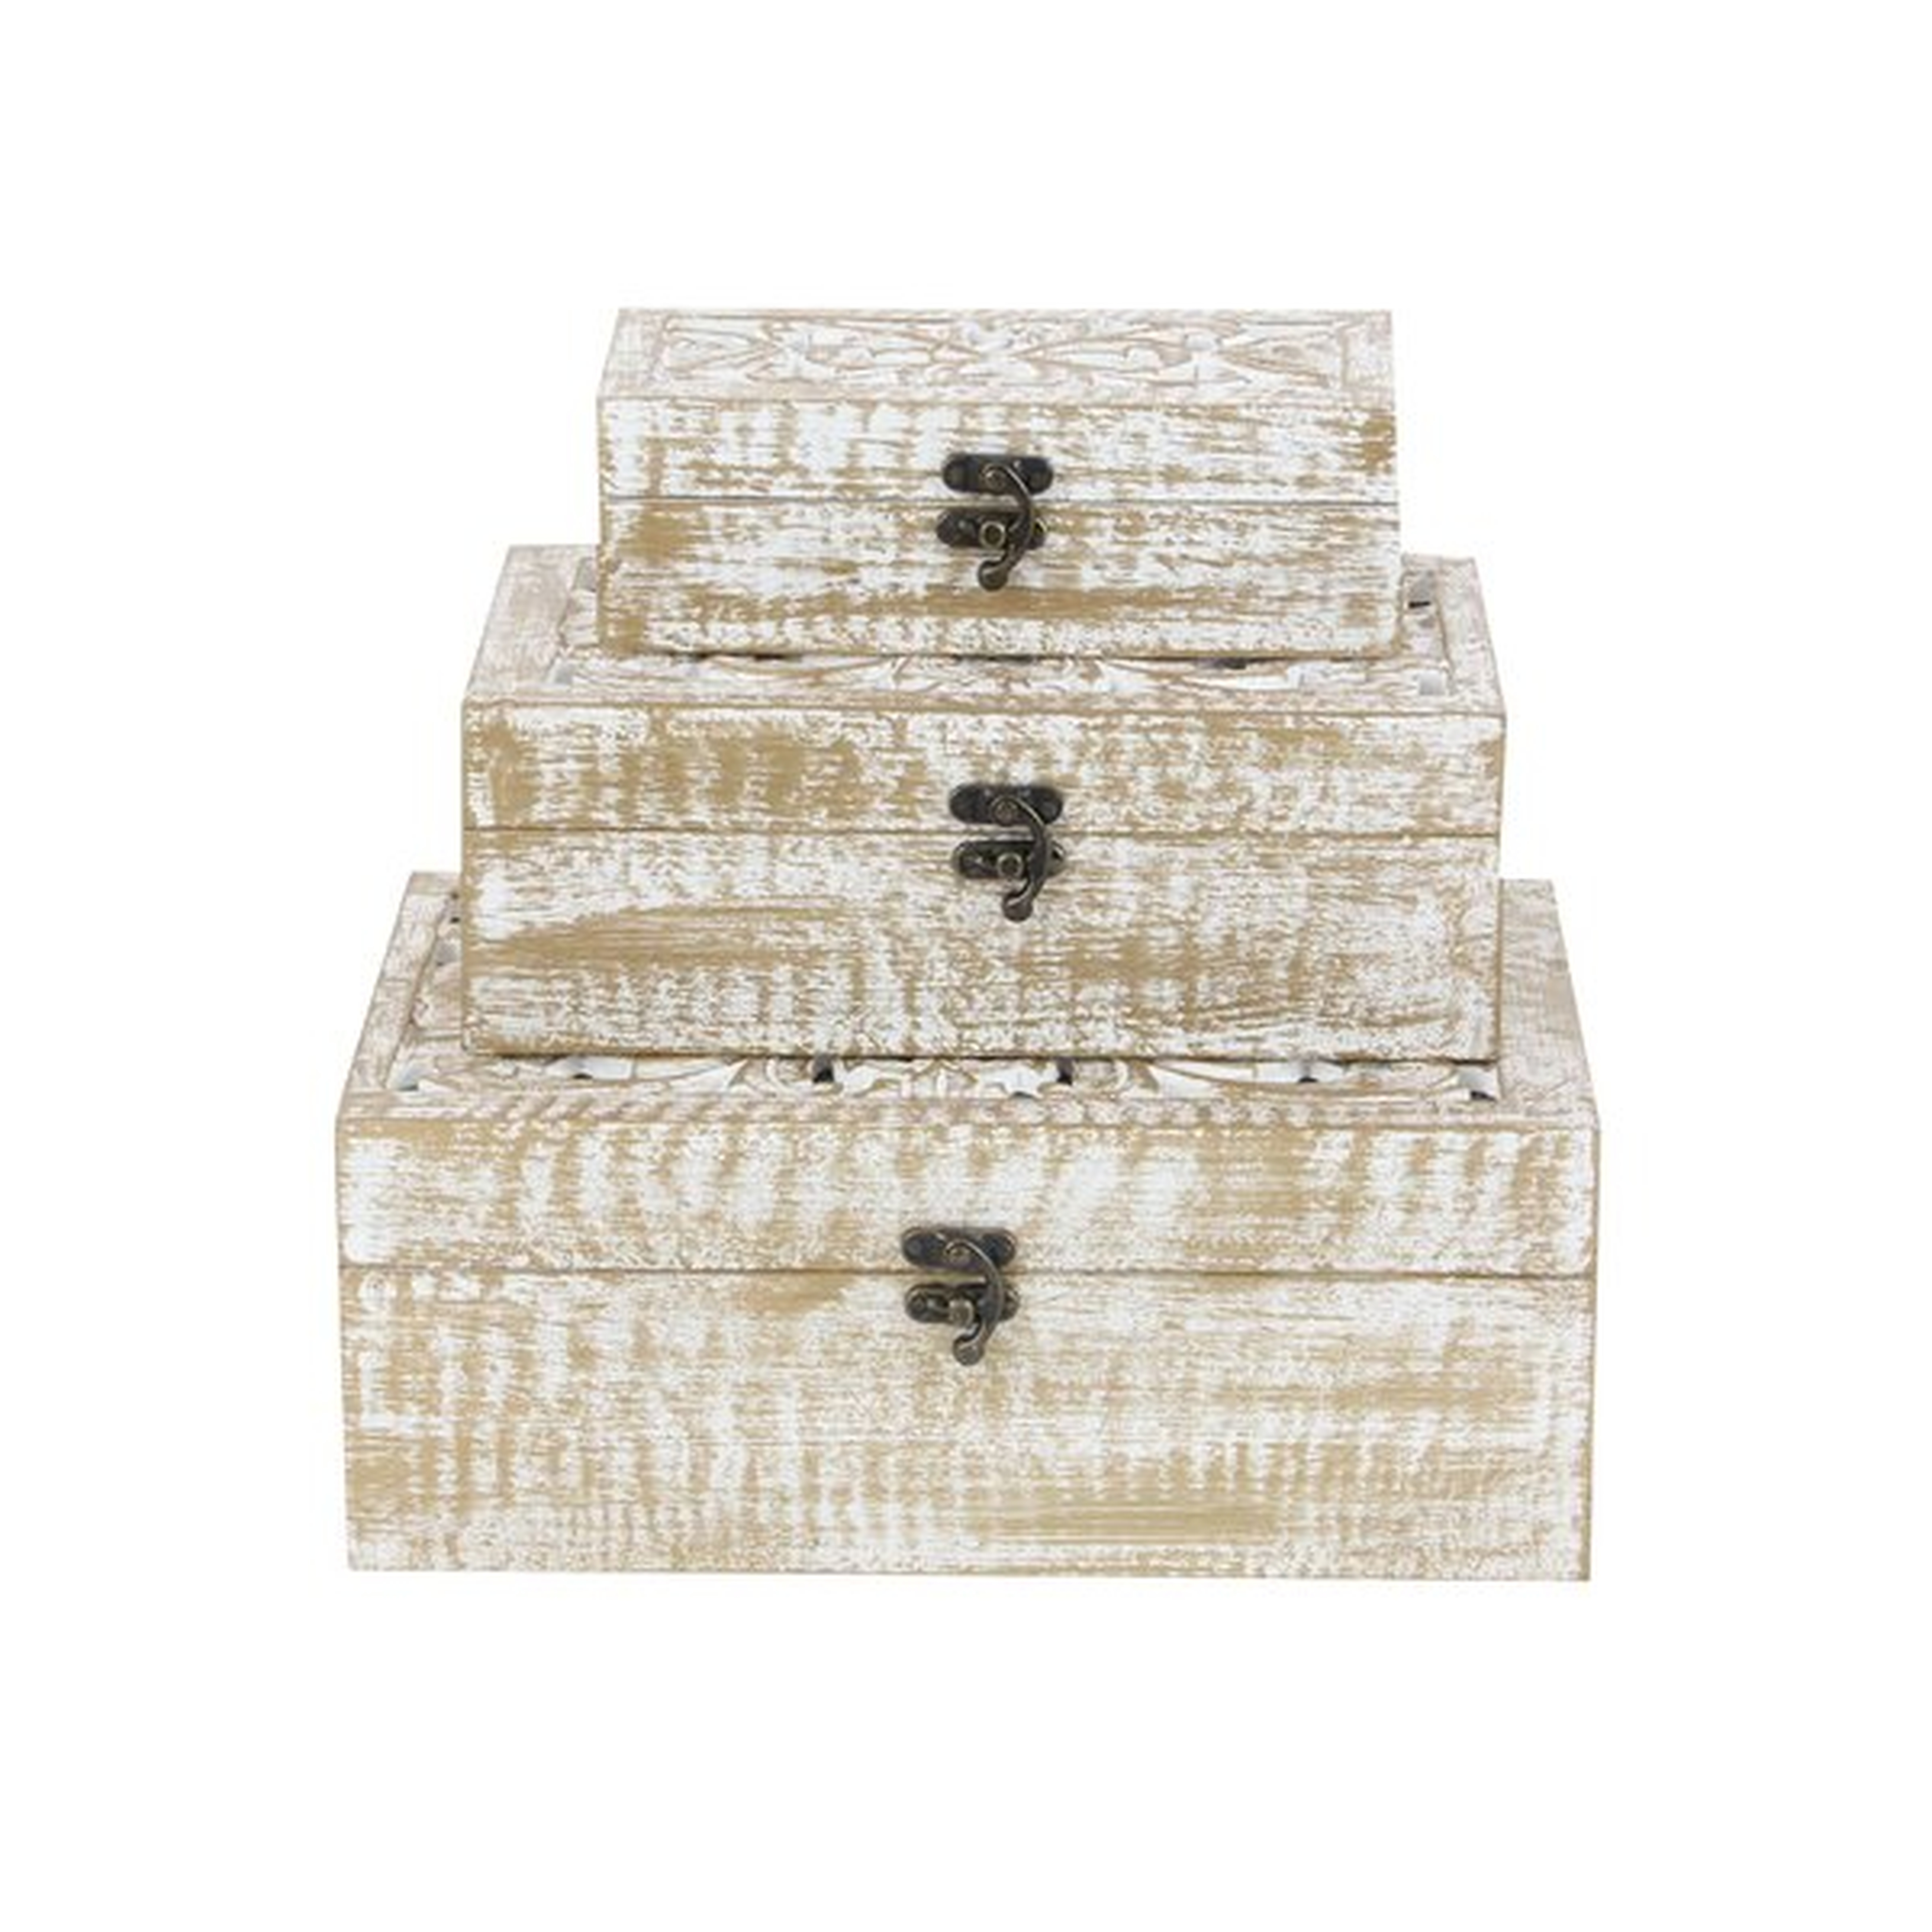 Heins Wood Carved 3 Piece Decorative Box Set See More from Union Rustic Shop - Wayfair